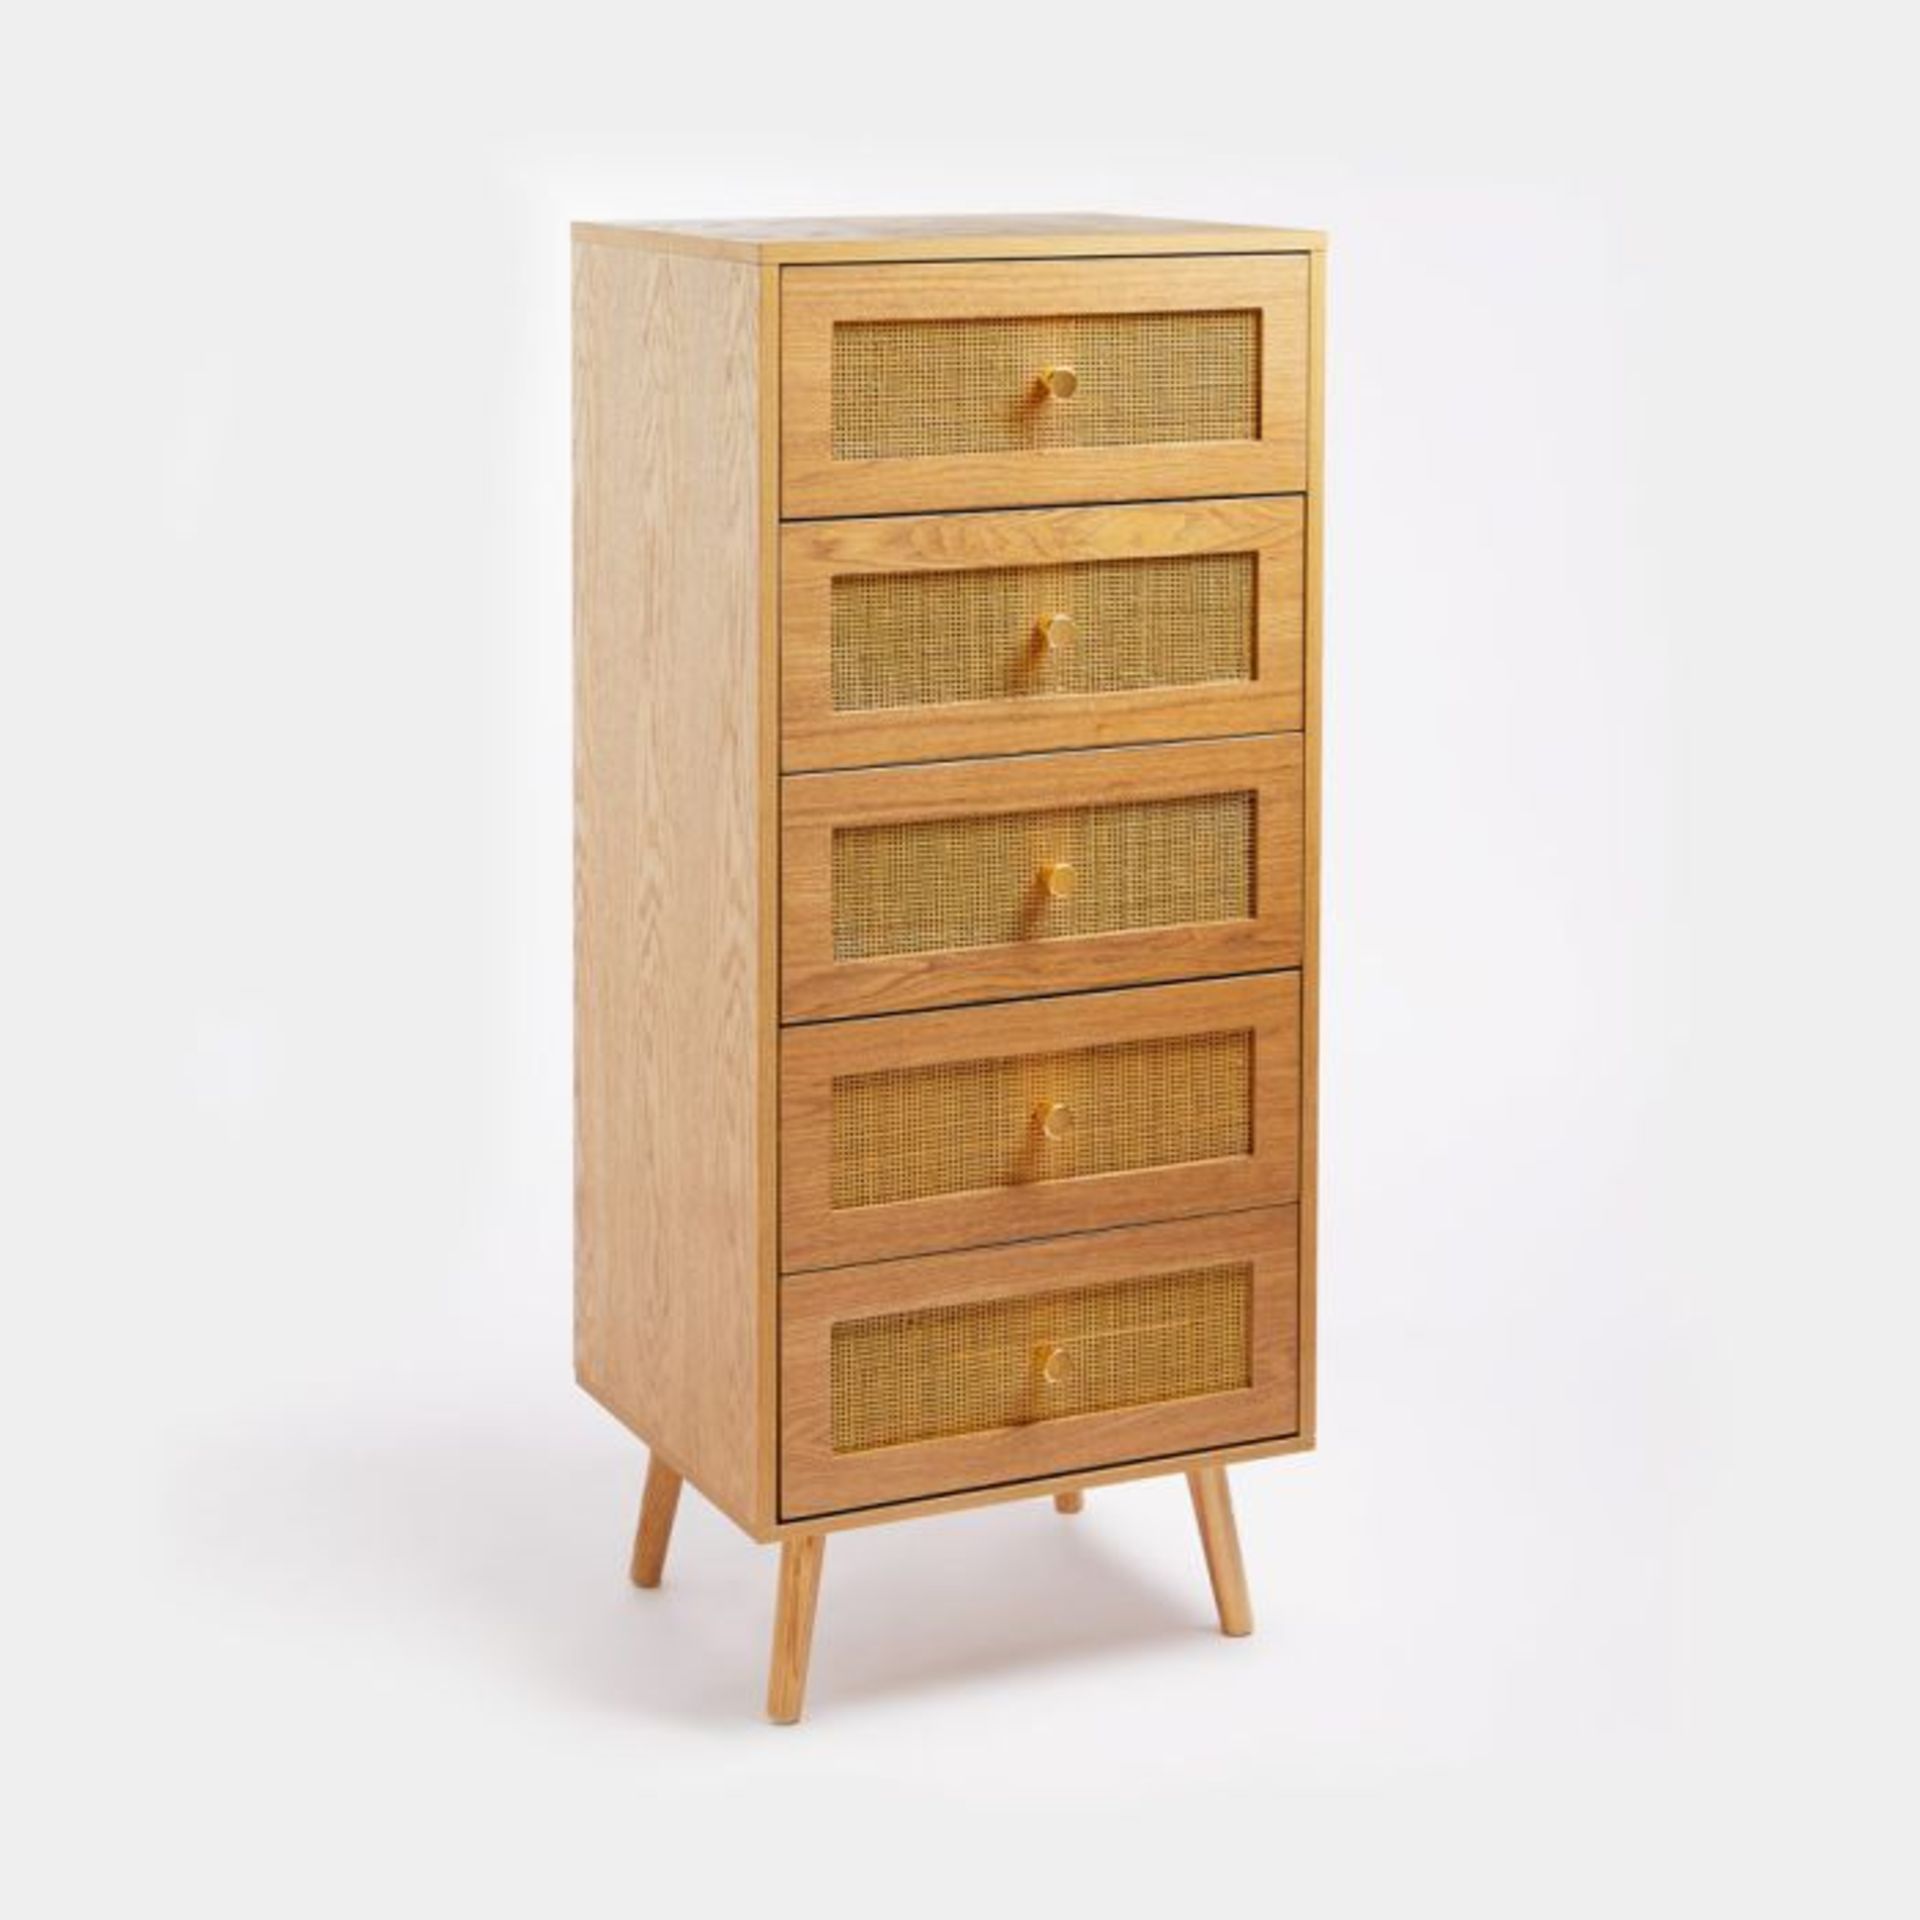 5 Drawer Rattan Tall Chest of Drawers. - Er33. Complete with five storage drawers, this unit is just